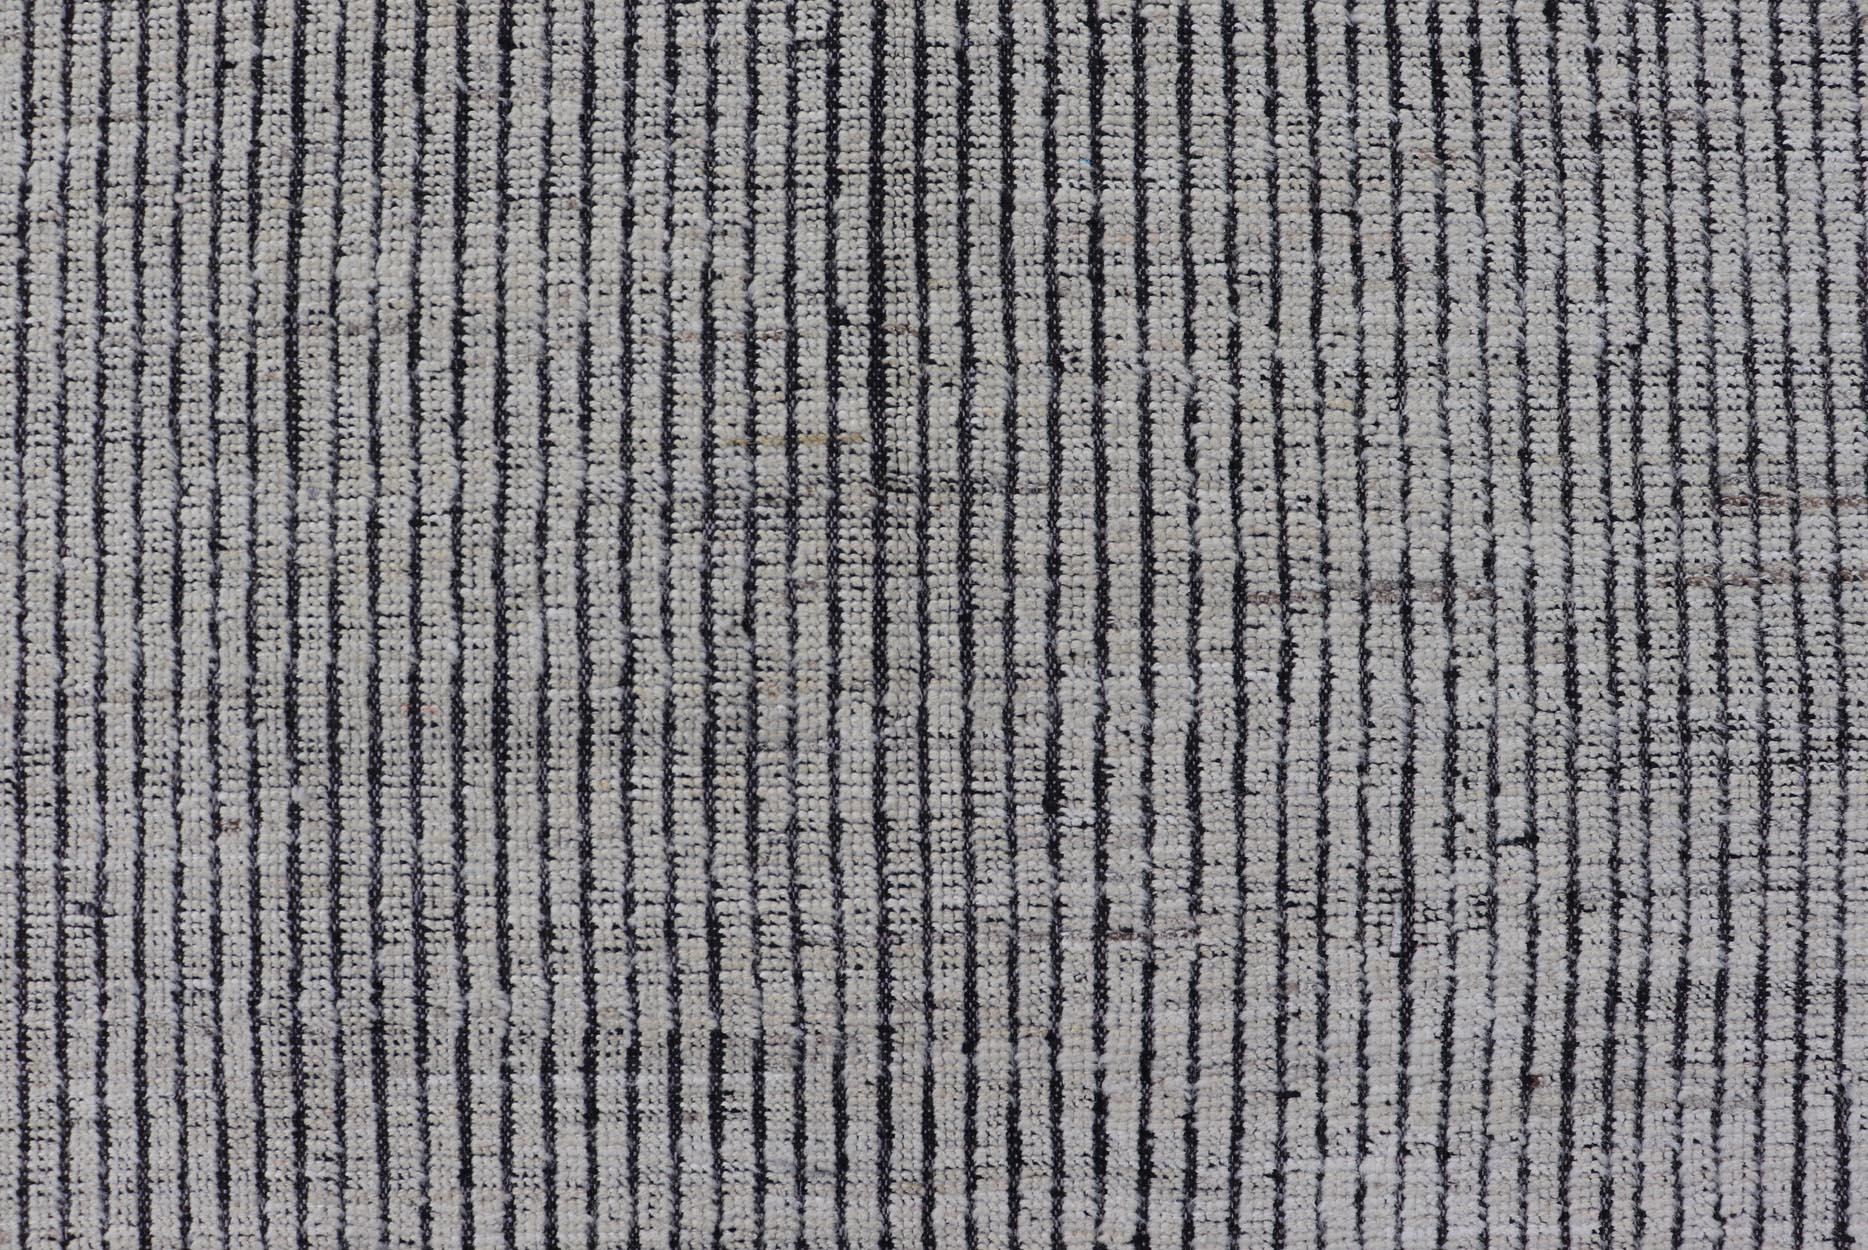 Modern Gallery Rug in White and Black background and Distressed Texture For Sale 2